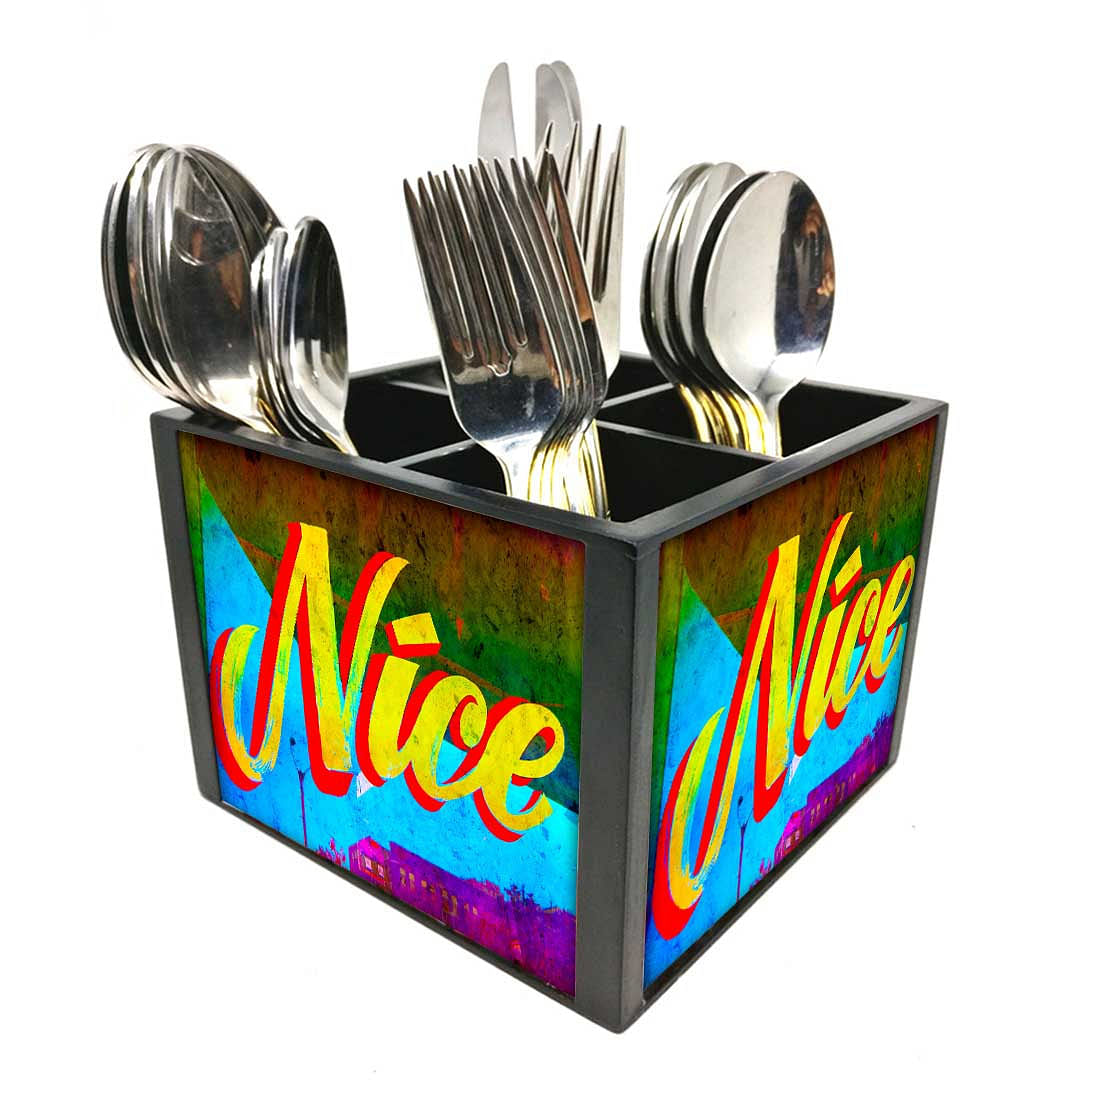 Nice Cutlery Holder Stand Silverware Caddy Organizer for Spoons, Forks & Knives-Made of Pinewood Nutcase